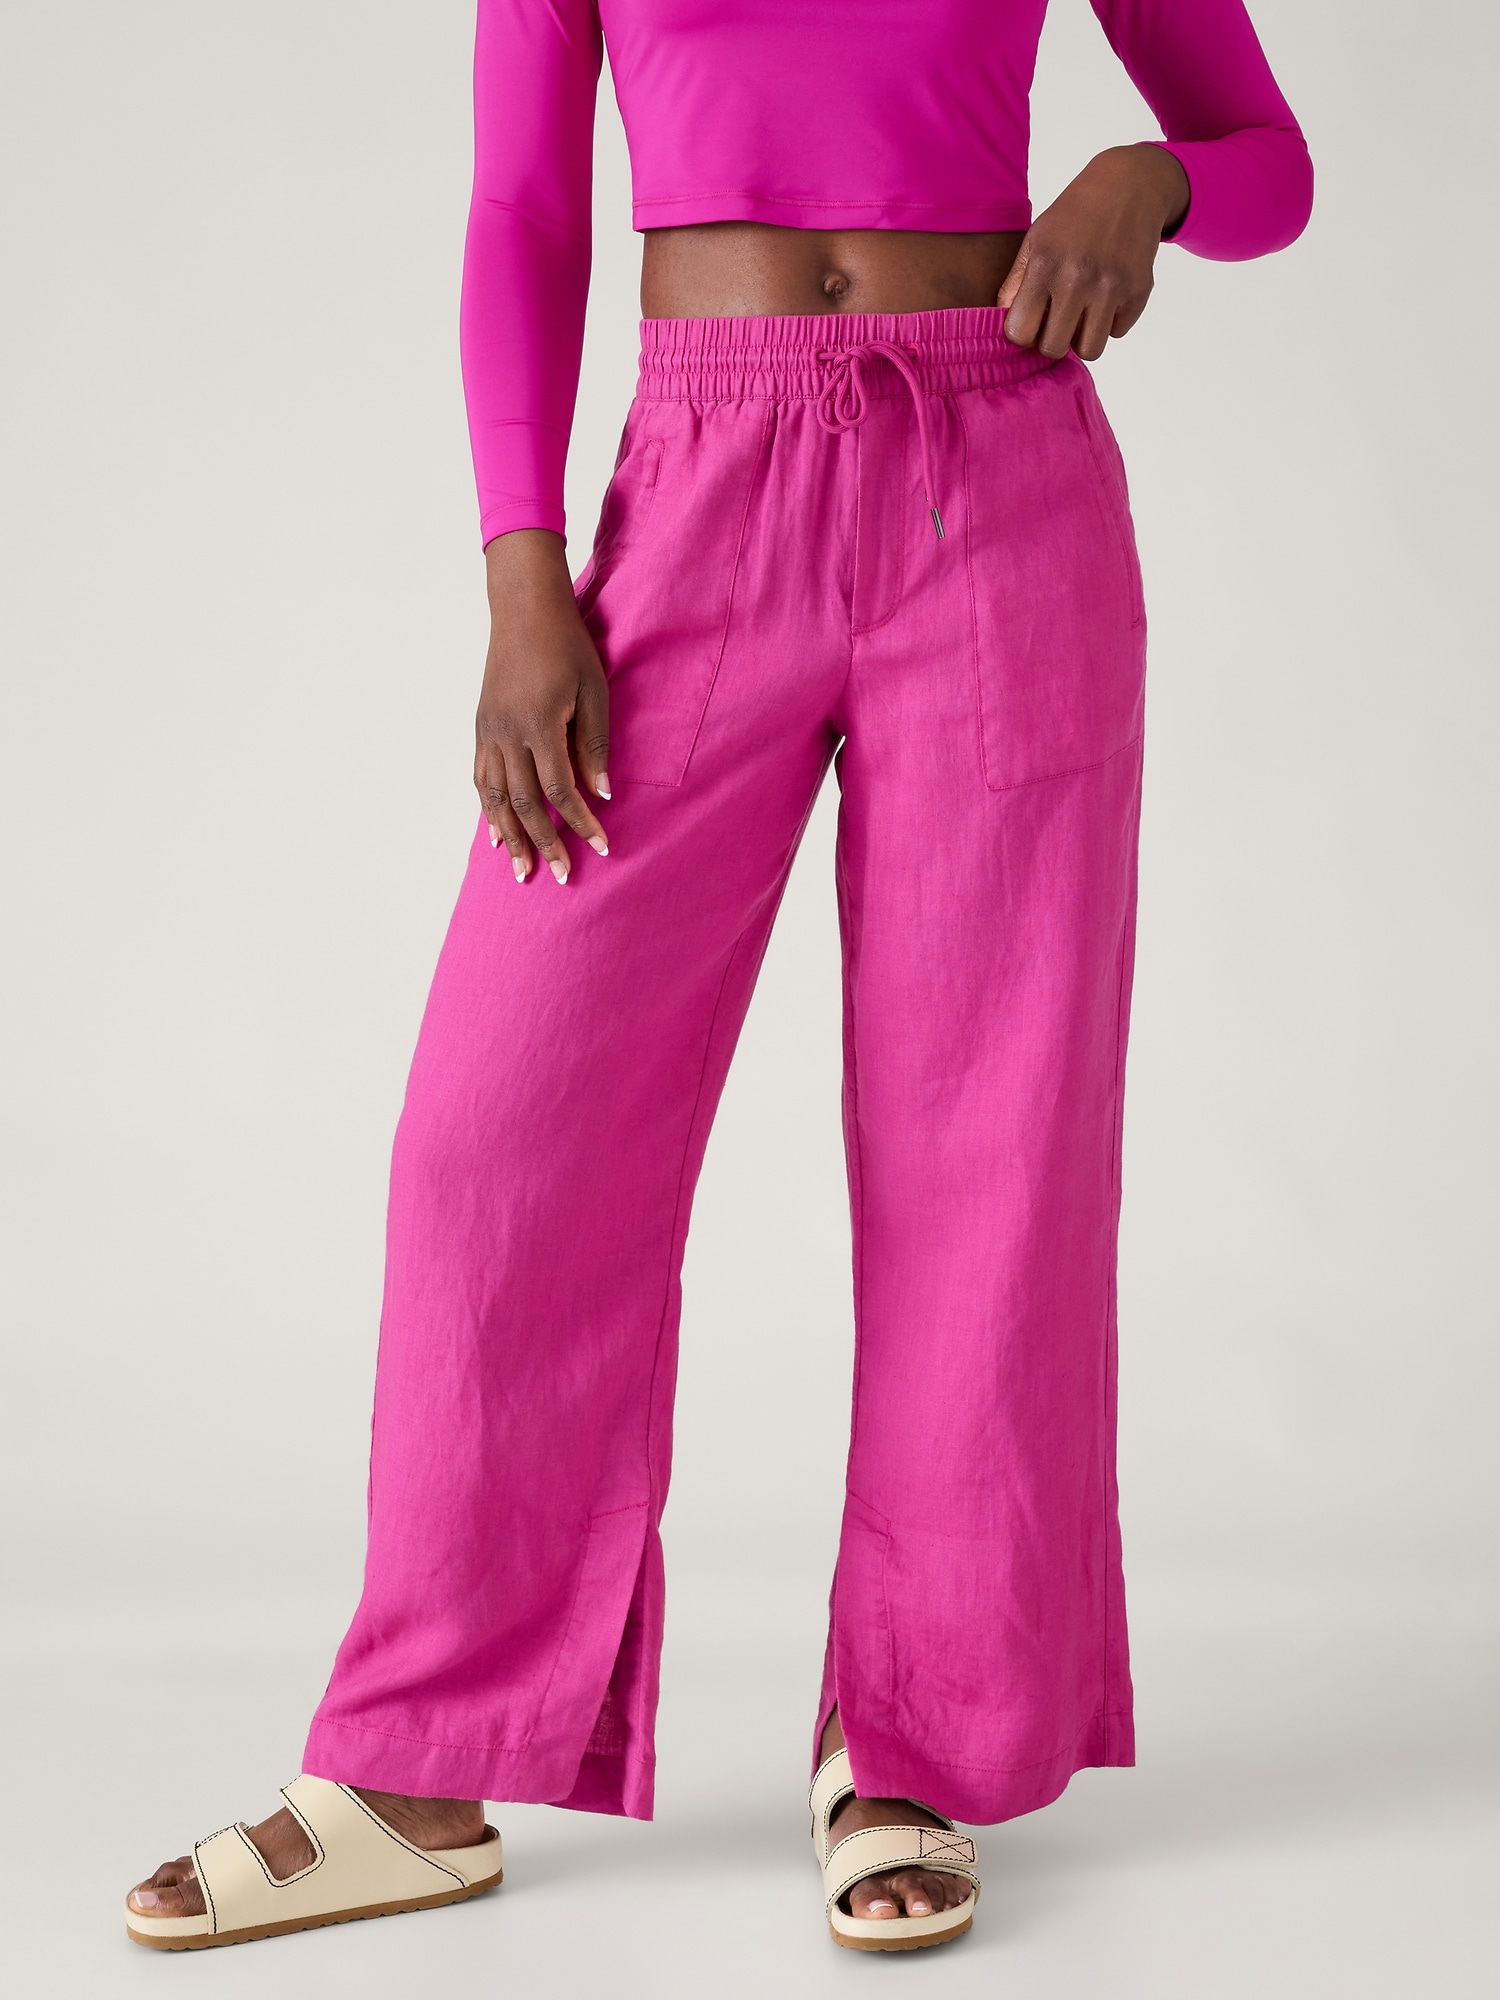 Women's High-rise Wide Leg Linen Pull-on Pants - A New Day™ Pink